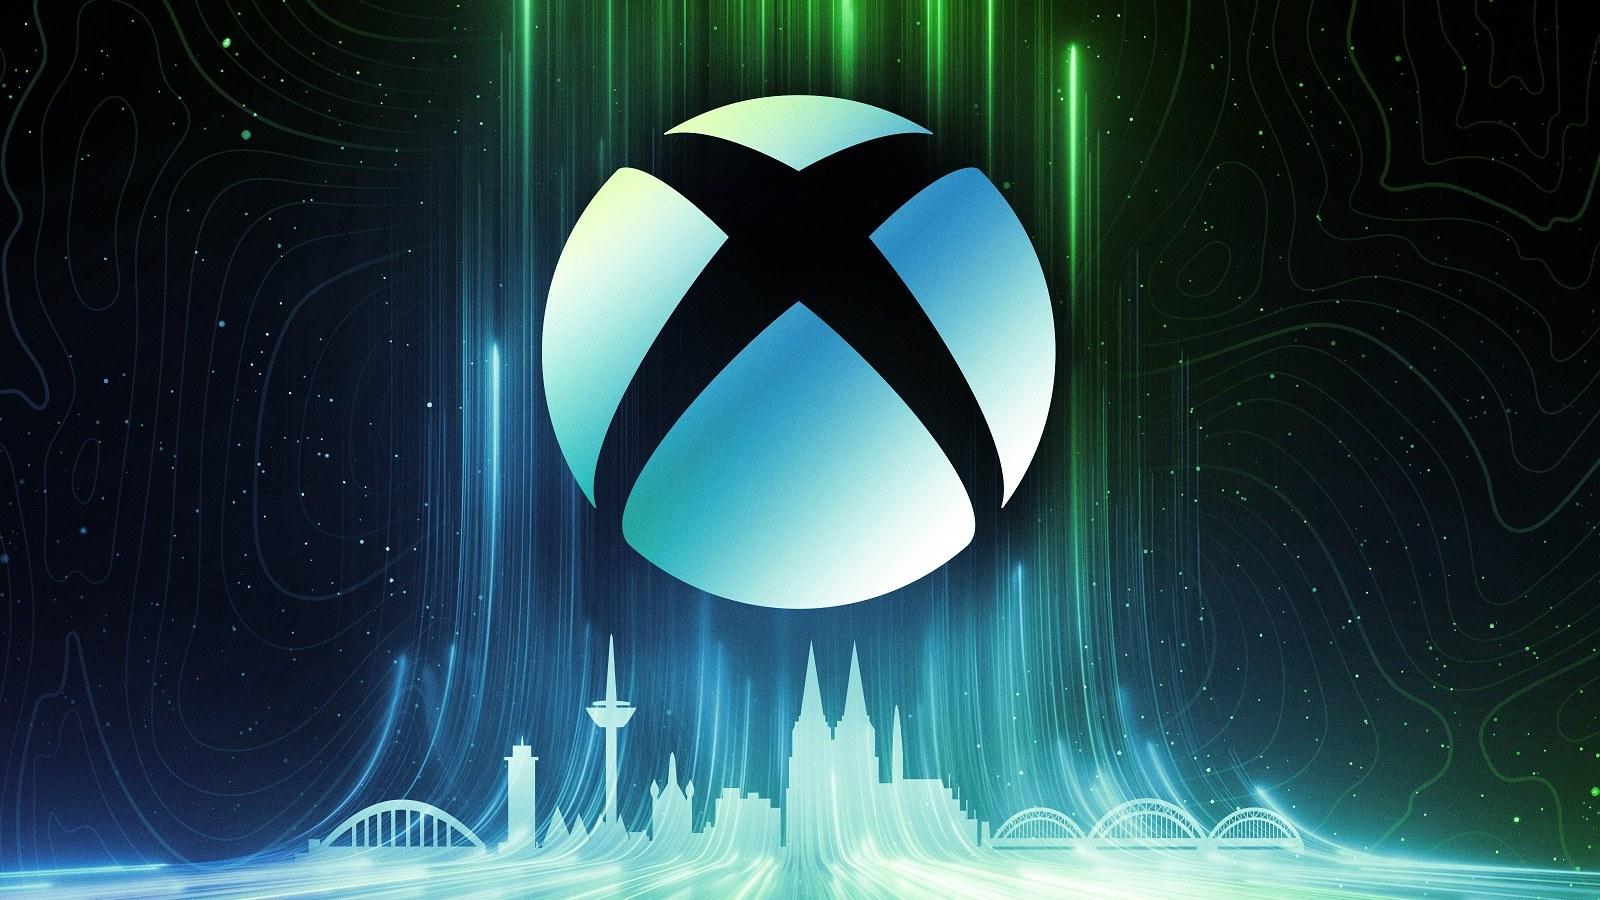 Xbox Logo on gradient background with a city on top of it